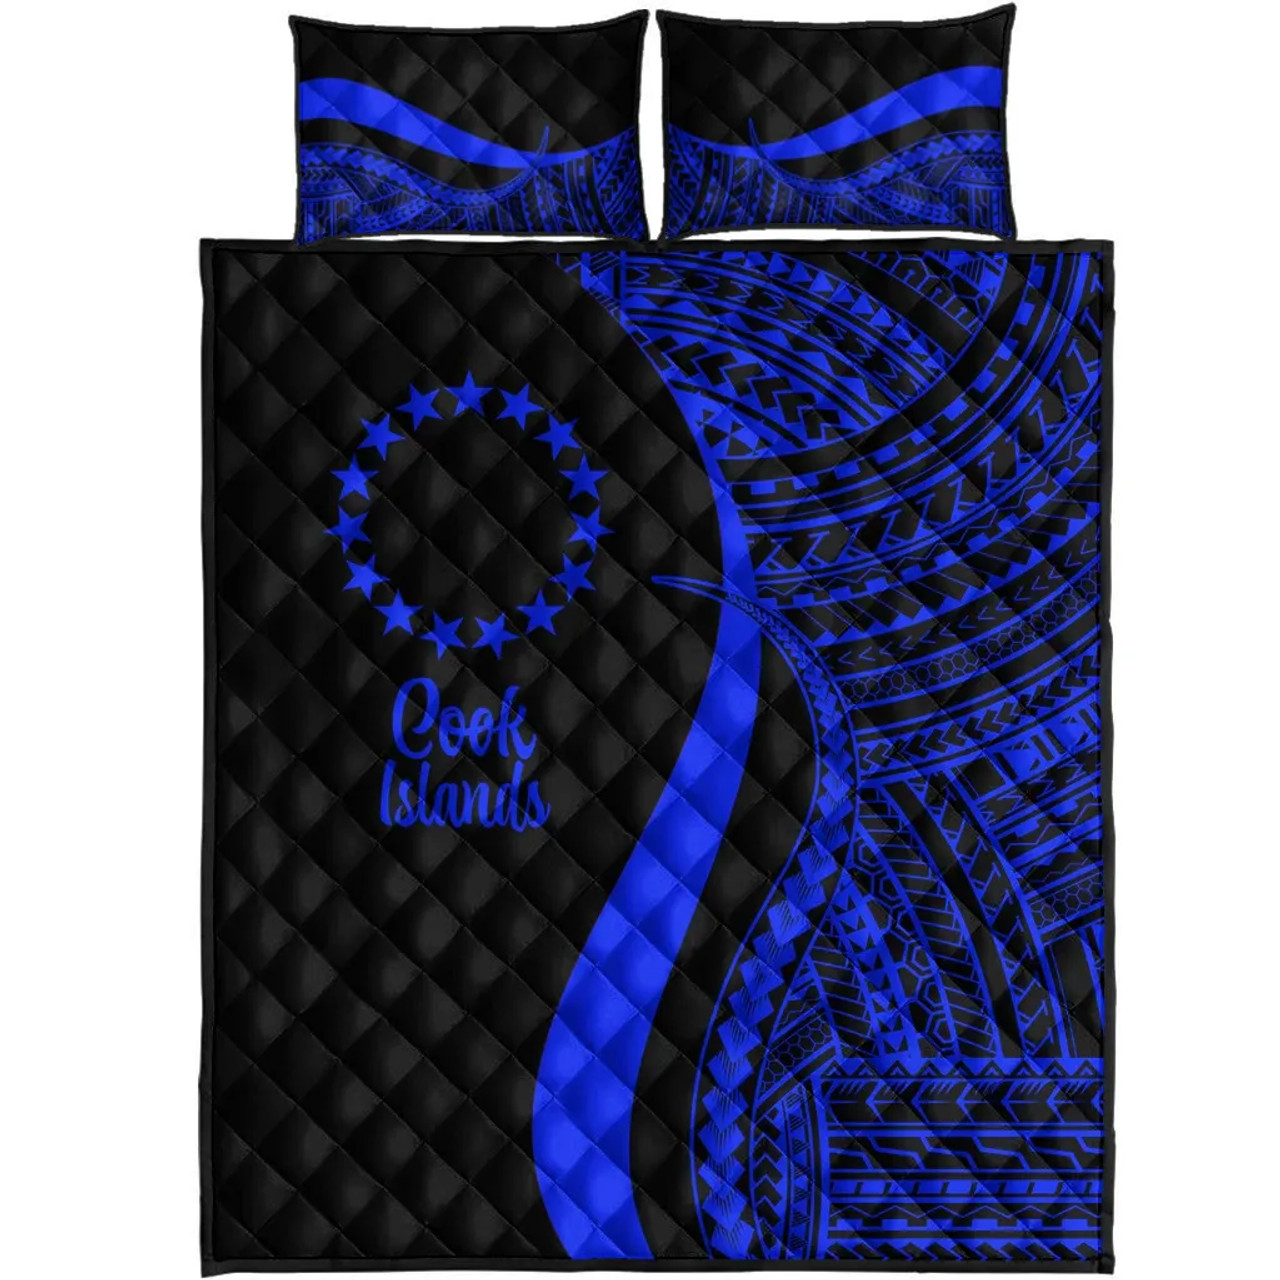 Cook Islands Quilt Bet Set - Blue Polynesian Tentacle Tribal Pattern 5